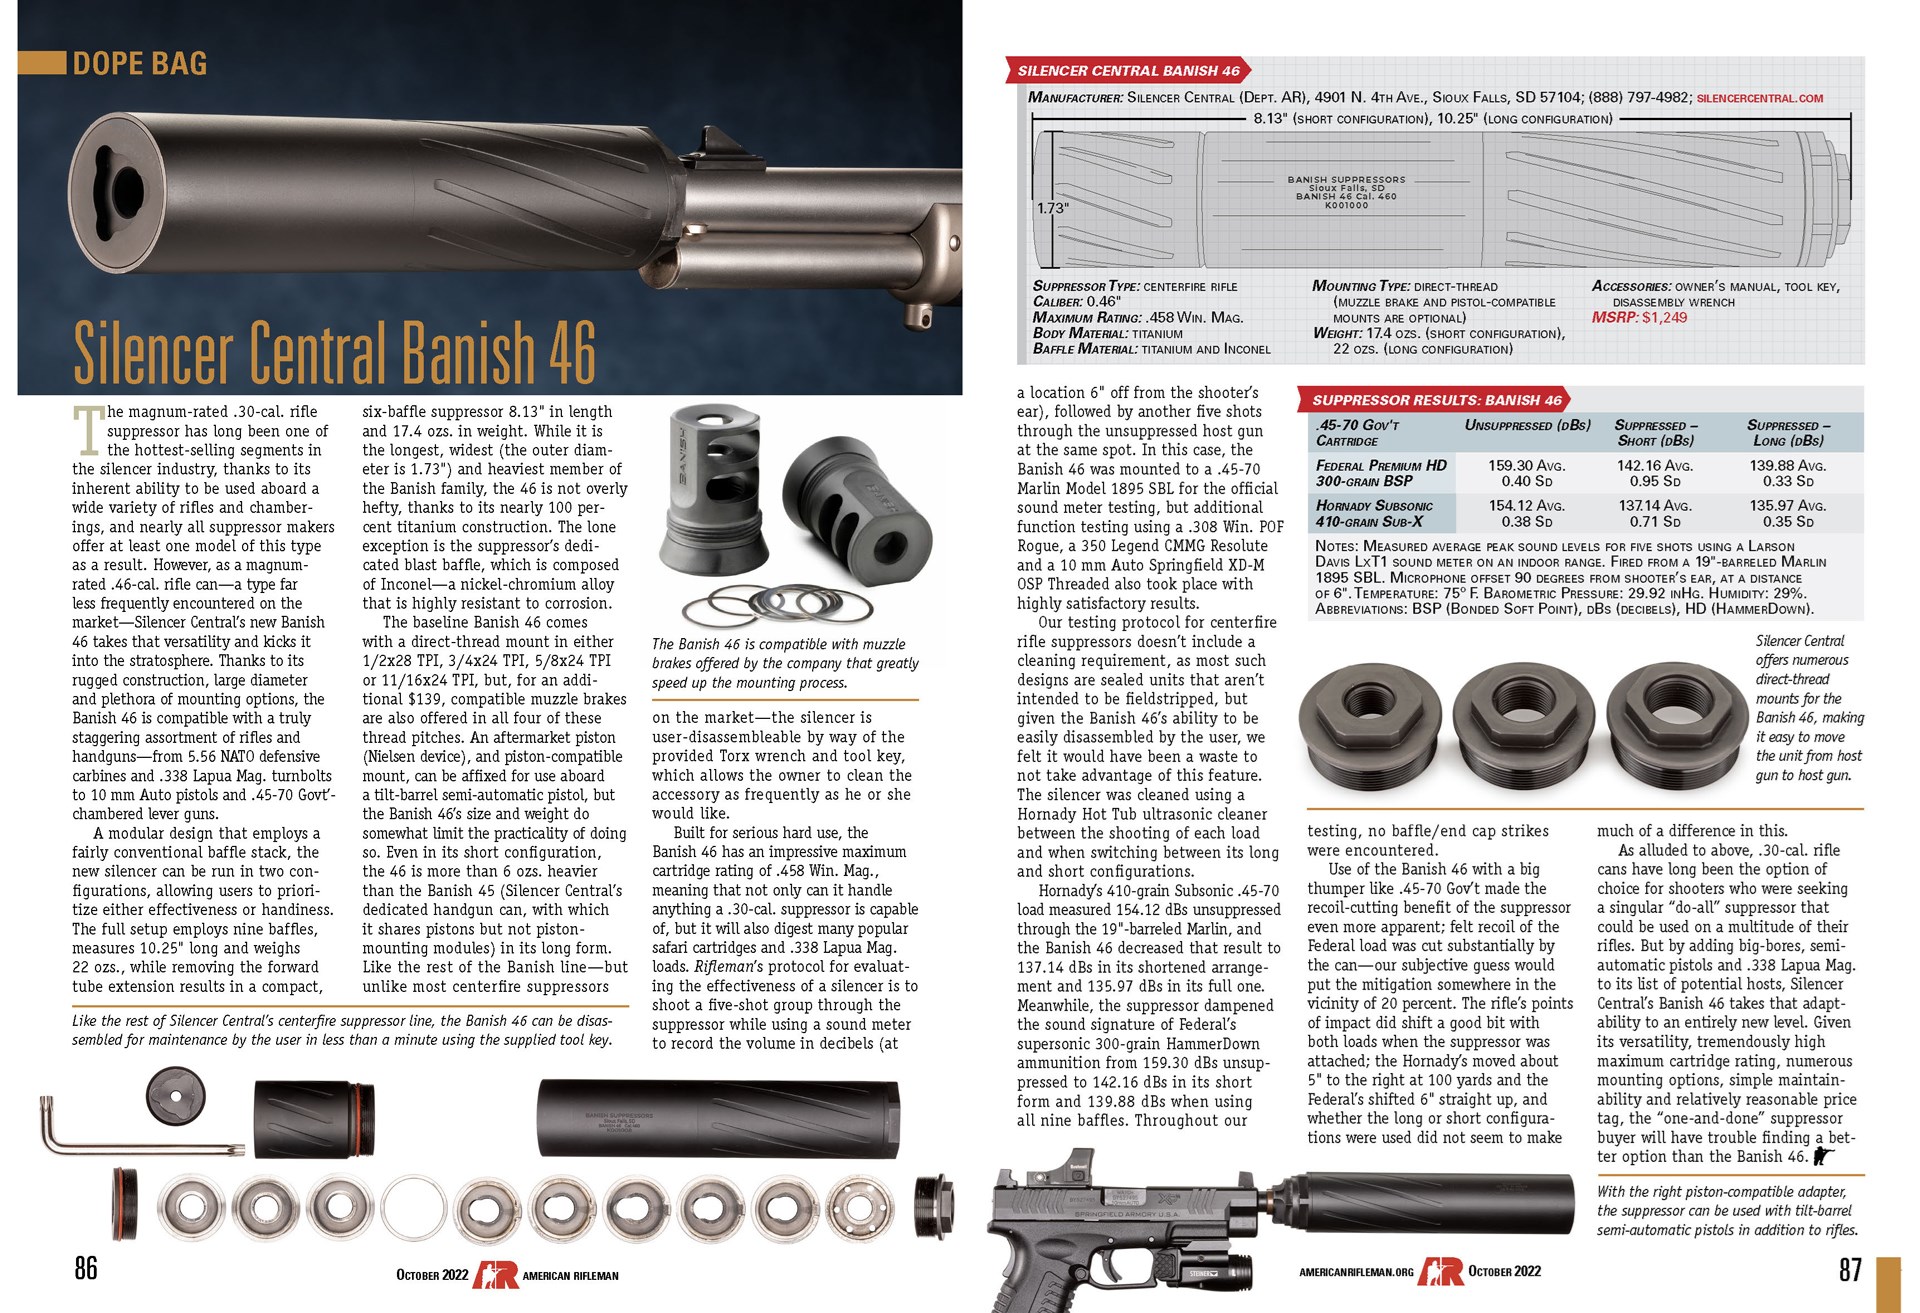 Silencer Central Banish 46 magazine page article words technical evaluation review "Dope Bag" testing gun parts suppressor